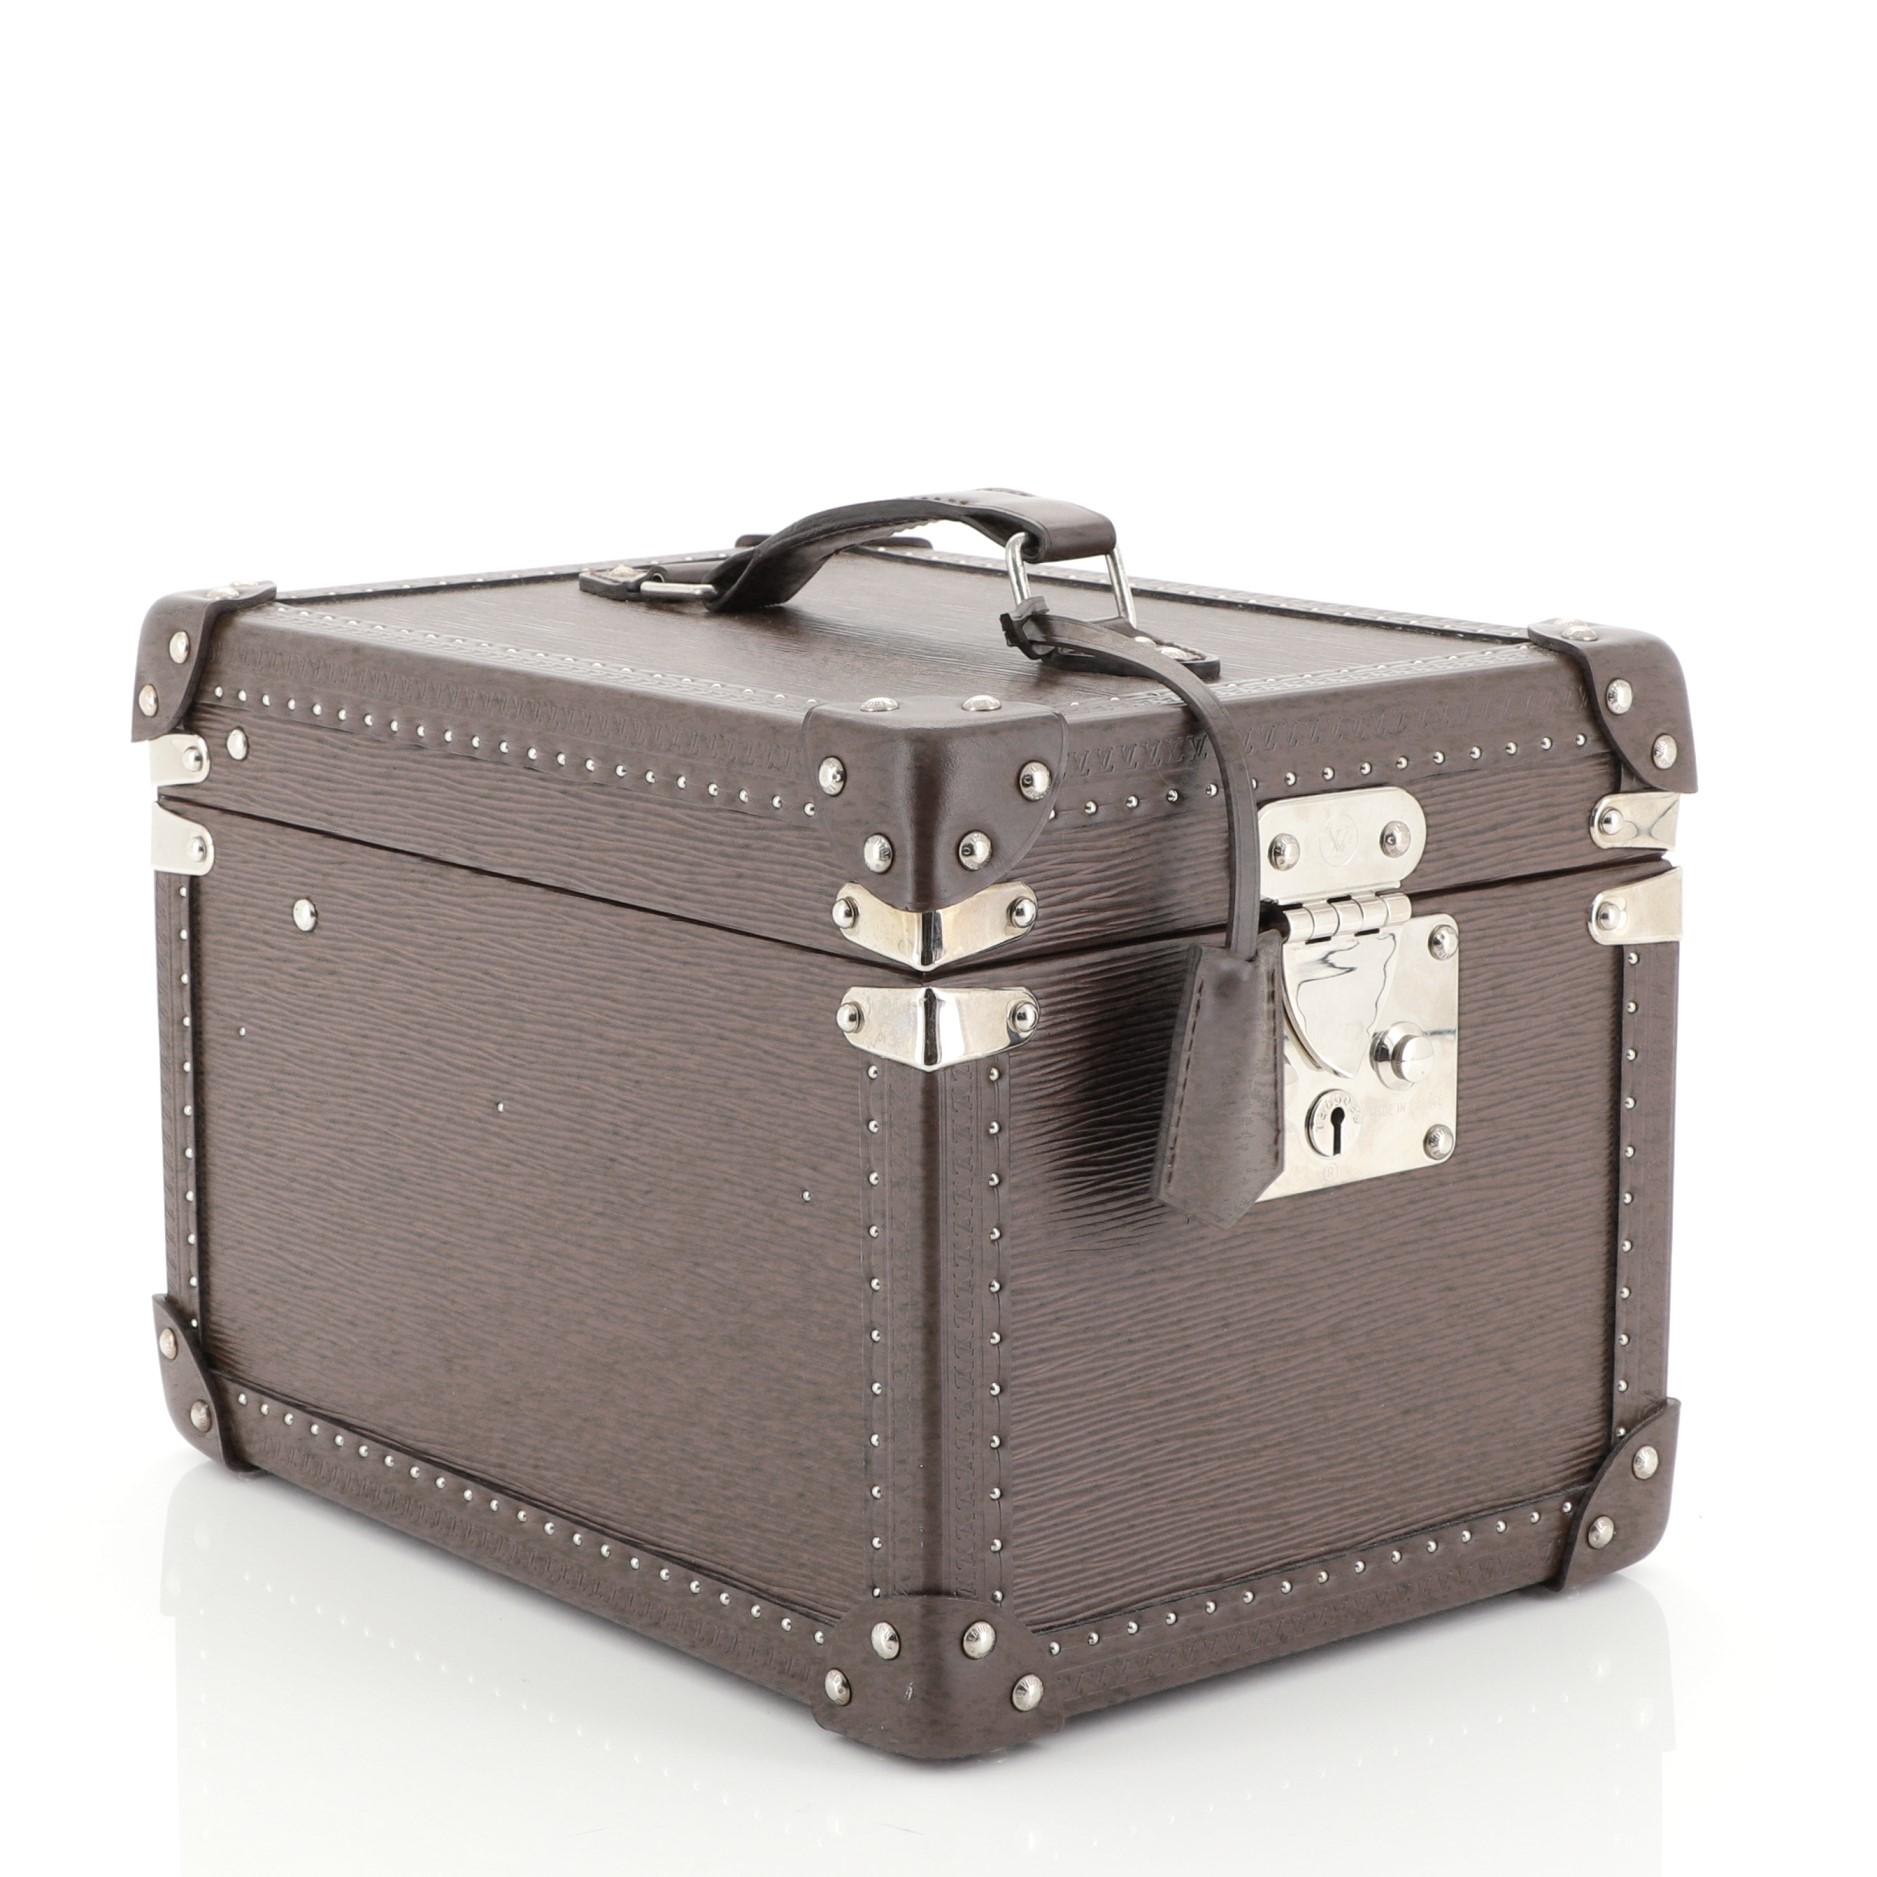 This Louis Vuitton Boite Flacons Beauty Train Case Epi Leather, crafted from brown leather, features vachetta leather top handle, leather tag, framed edges, and silver-tone hardware. Its signature S-lock closure opens to a brown microfiber interior